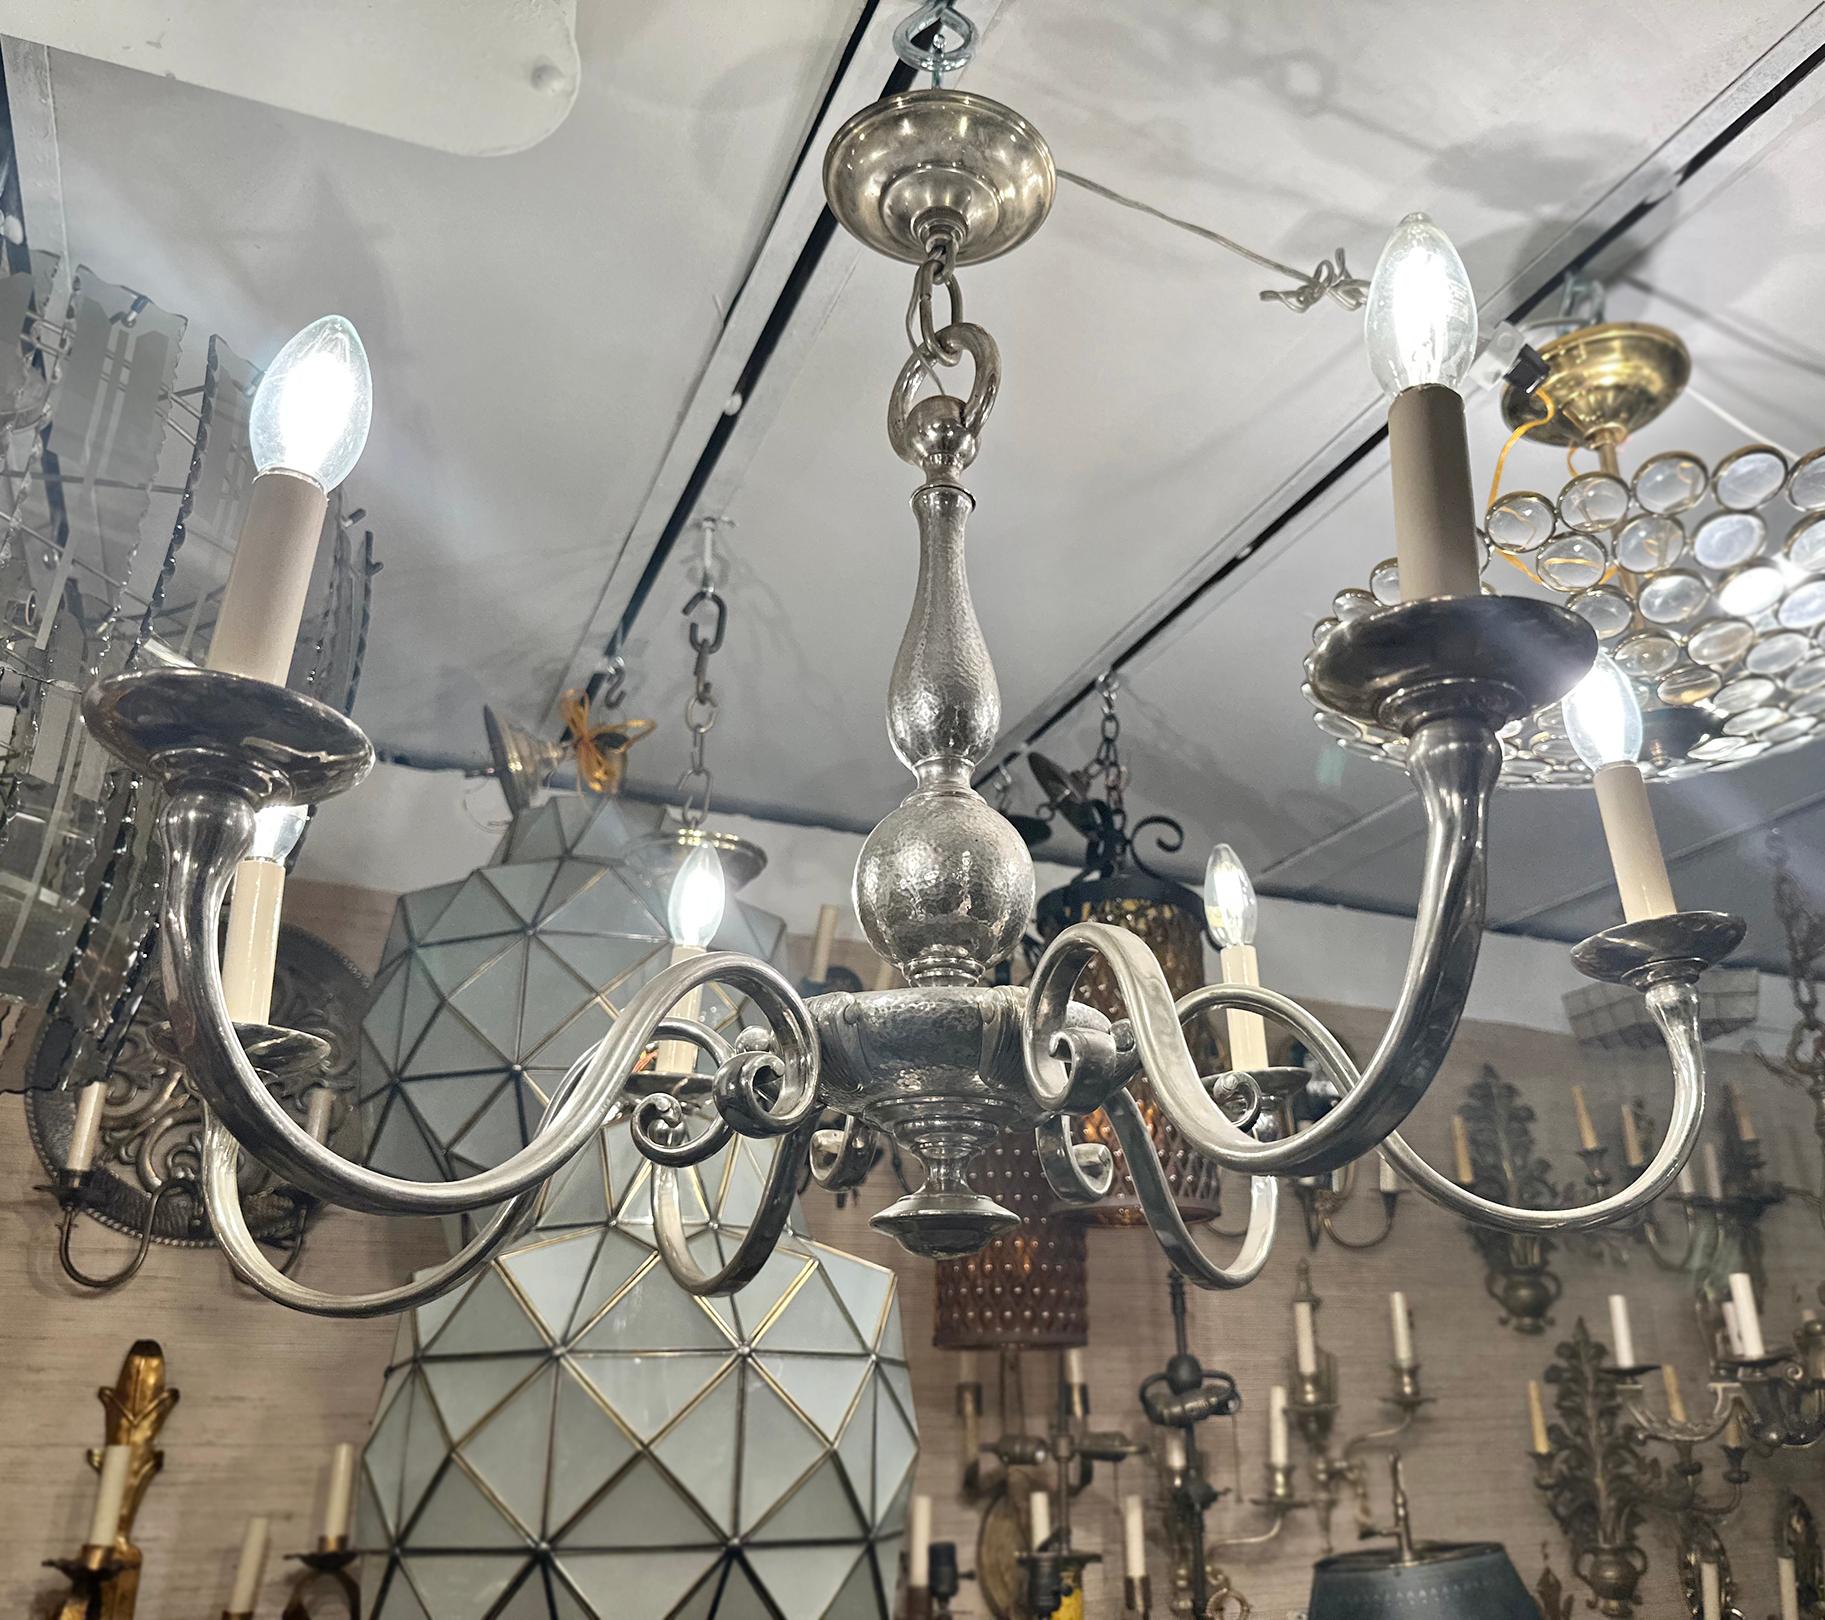 A pair of circa 1920's English silver plated chandelier. Sold individually.

Measurements:
Minimum drop: 24